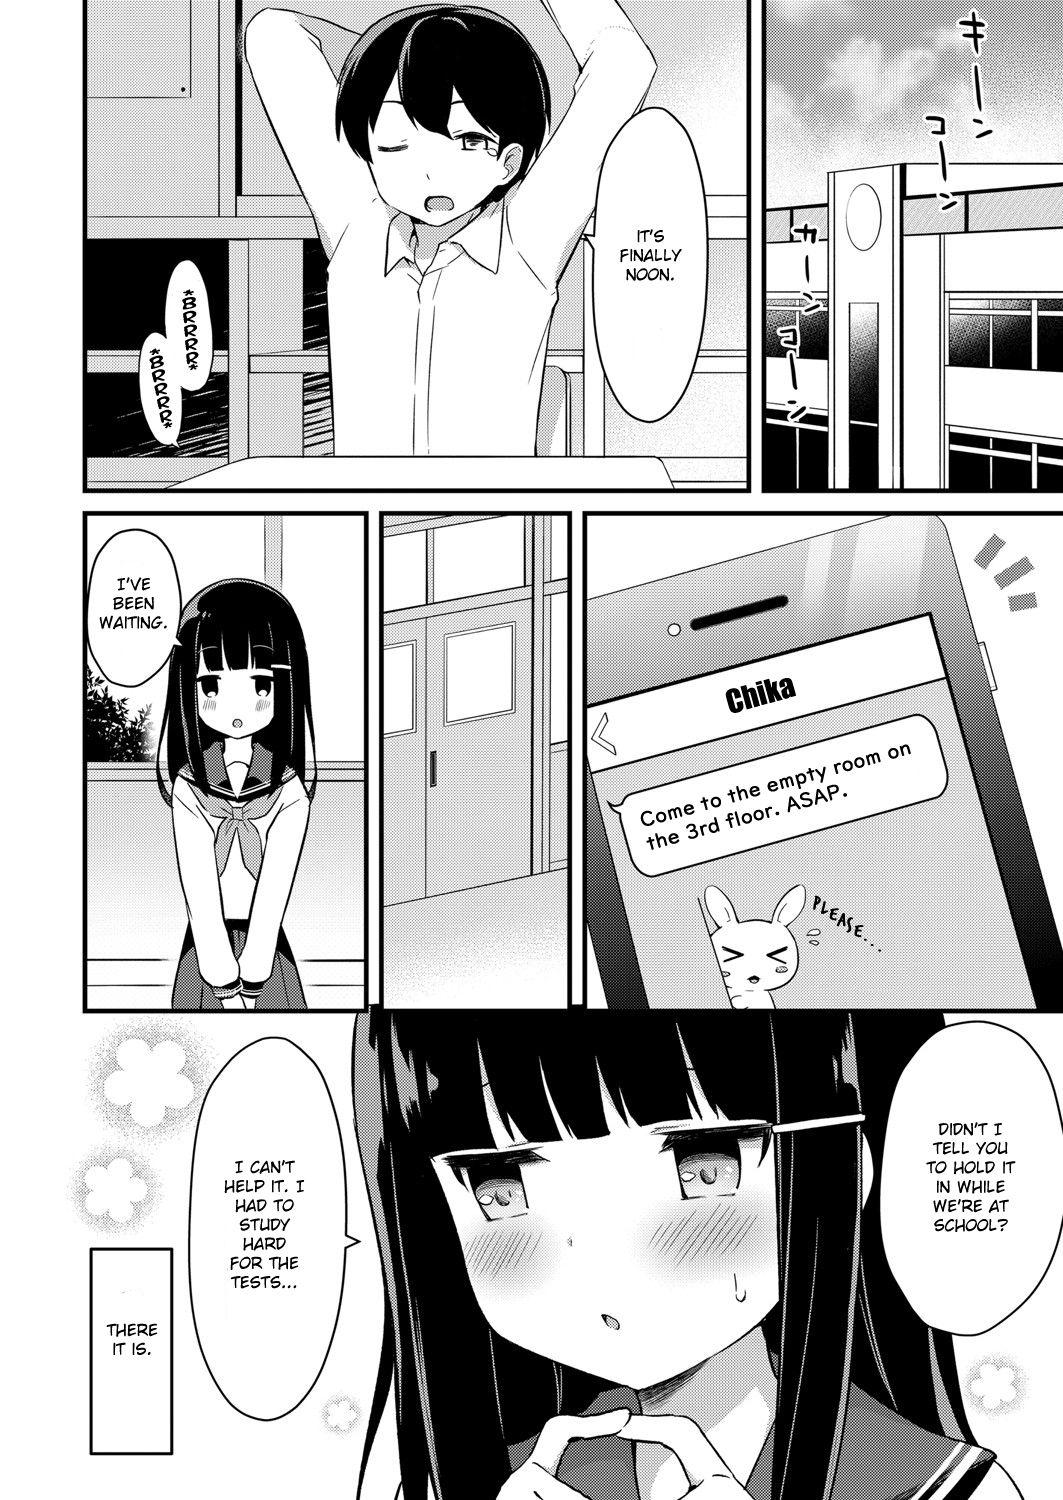 Crazy [Tiger] Yuuwaku・Imouto #2 Onii-chan wa seishori gakari | Little Sister Temptation #2 Onii-chan is in Charge of My Libido Management (COMIC Reboot Vol. 07) [English] [Digital] Moms - Page 4